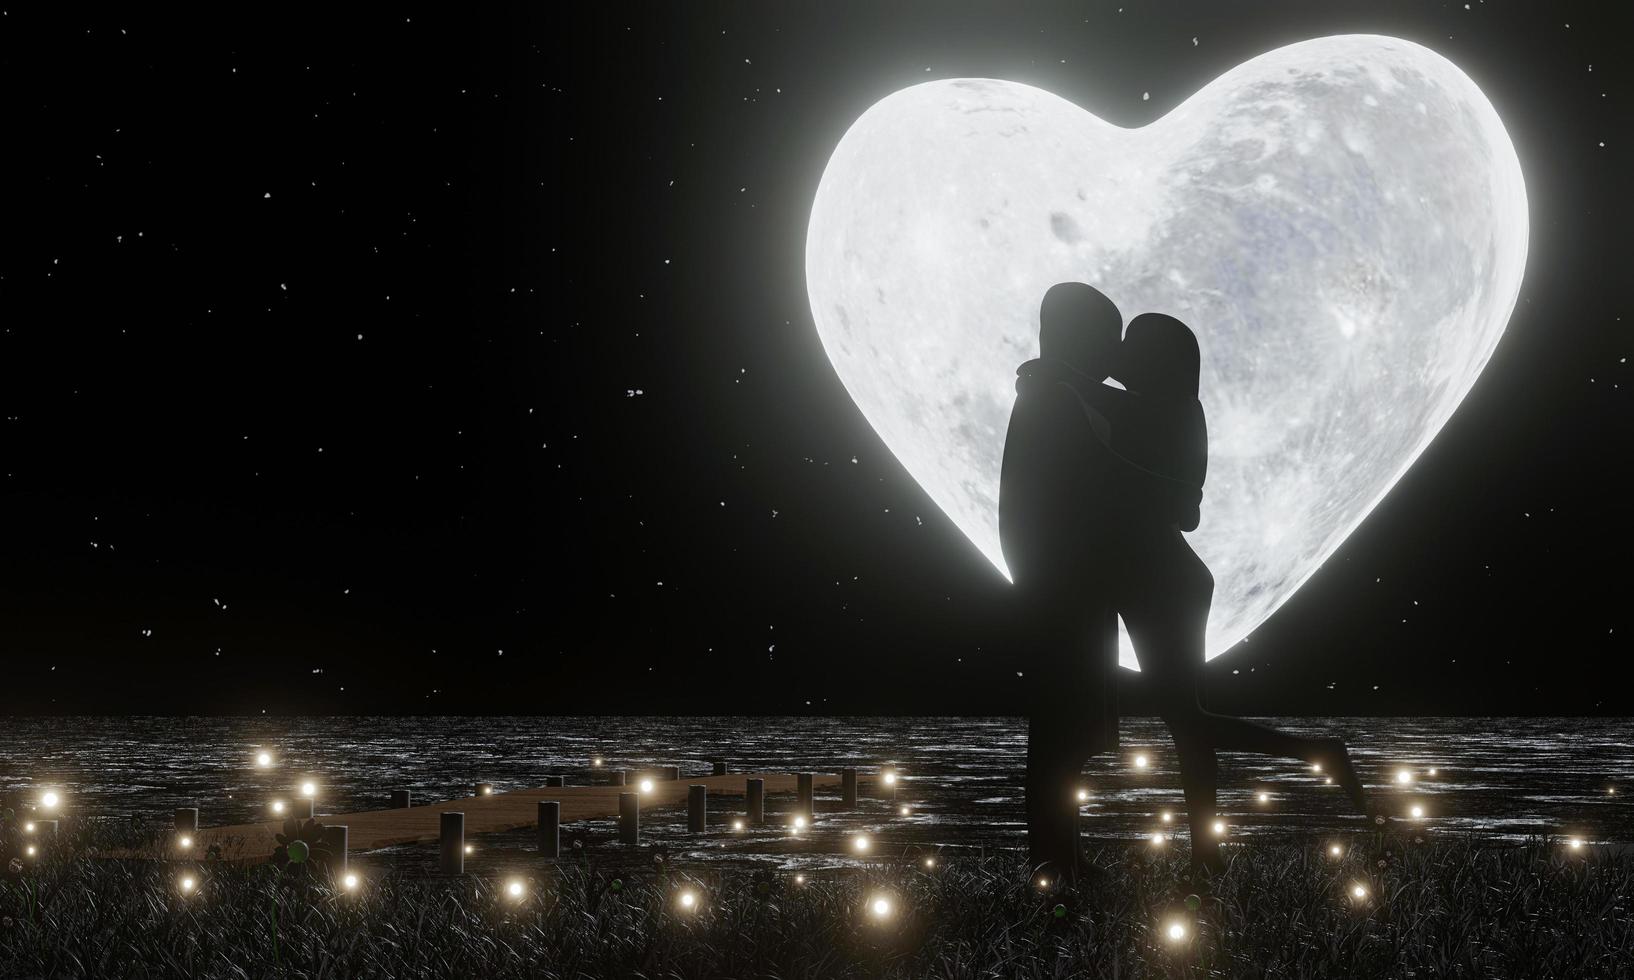 Silhouette Lovers Kissing Romanticly. Heart shape full moon and star full of the sky as the background. Fireflies fly over the grass and the water surface. Romance and marriage proposals. 3D Rendering photo